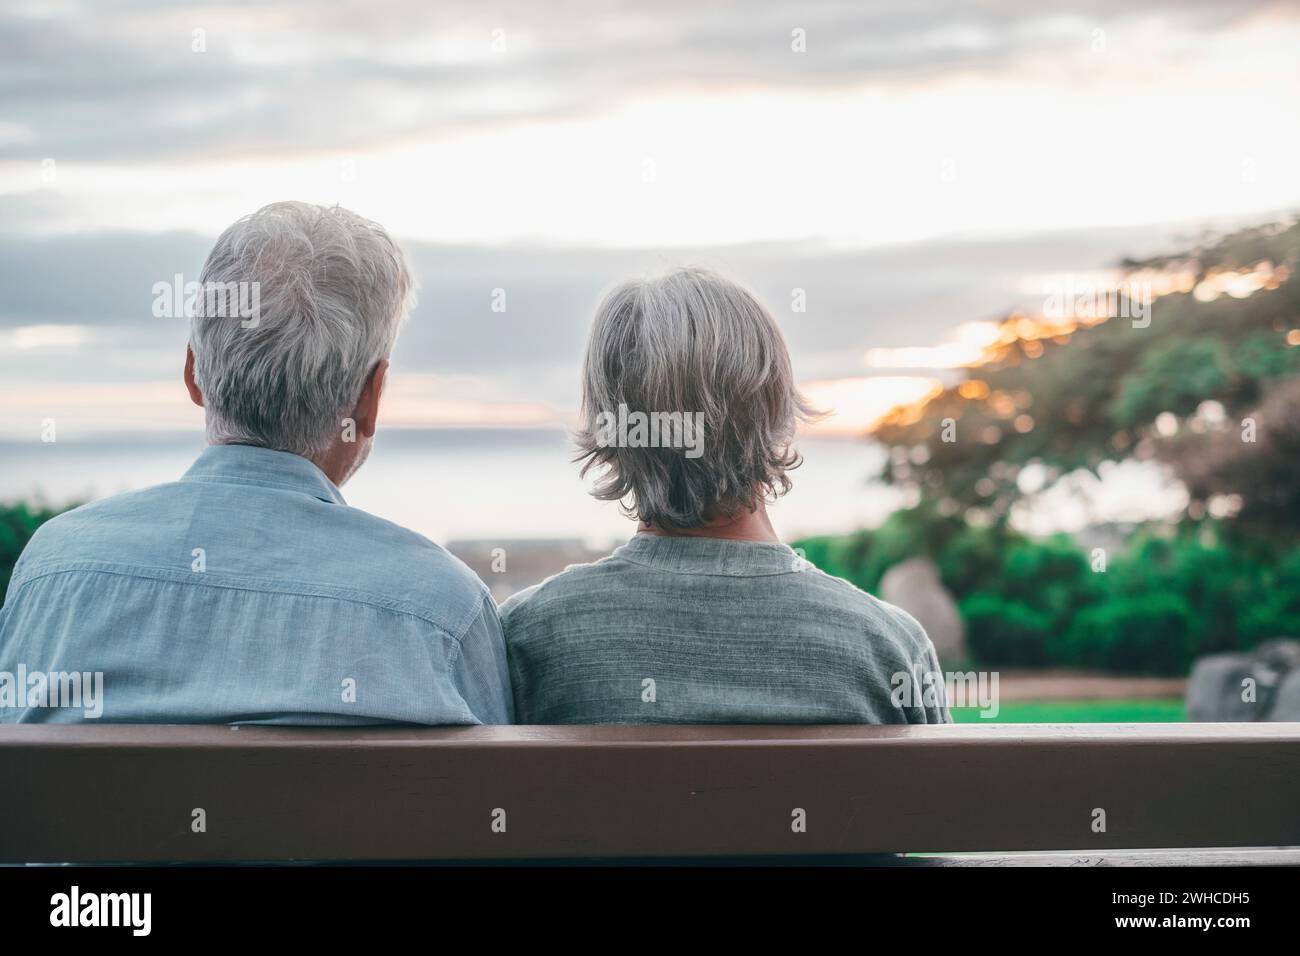 Head shot close up portrait happy grey haired middle aged woman with older husband, enjoying sitting on bench at park. Bonding loving old family couple embracing, looking sunset. Stock Photo